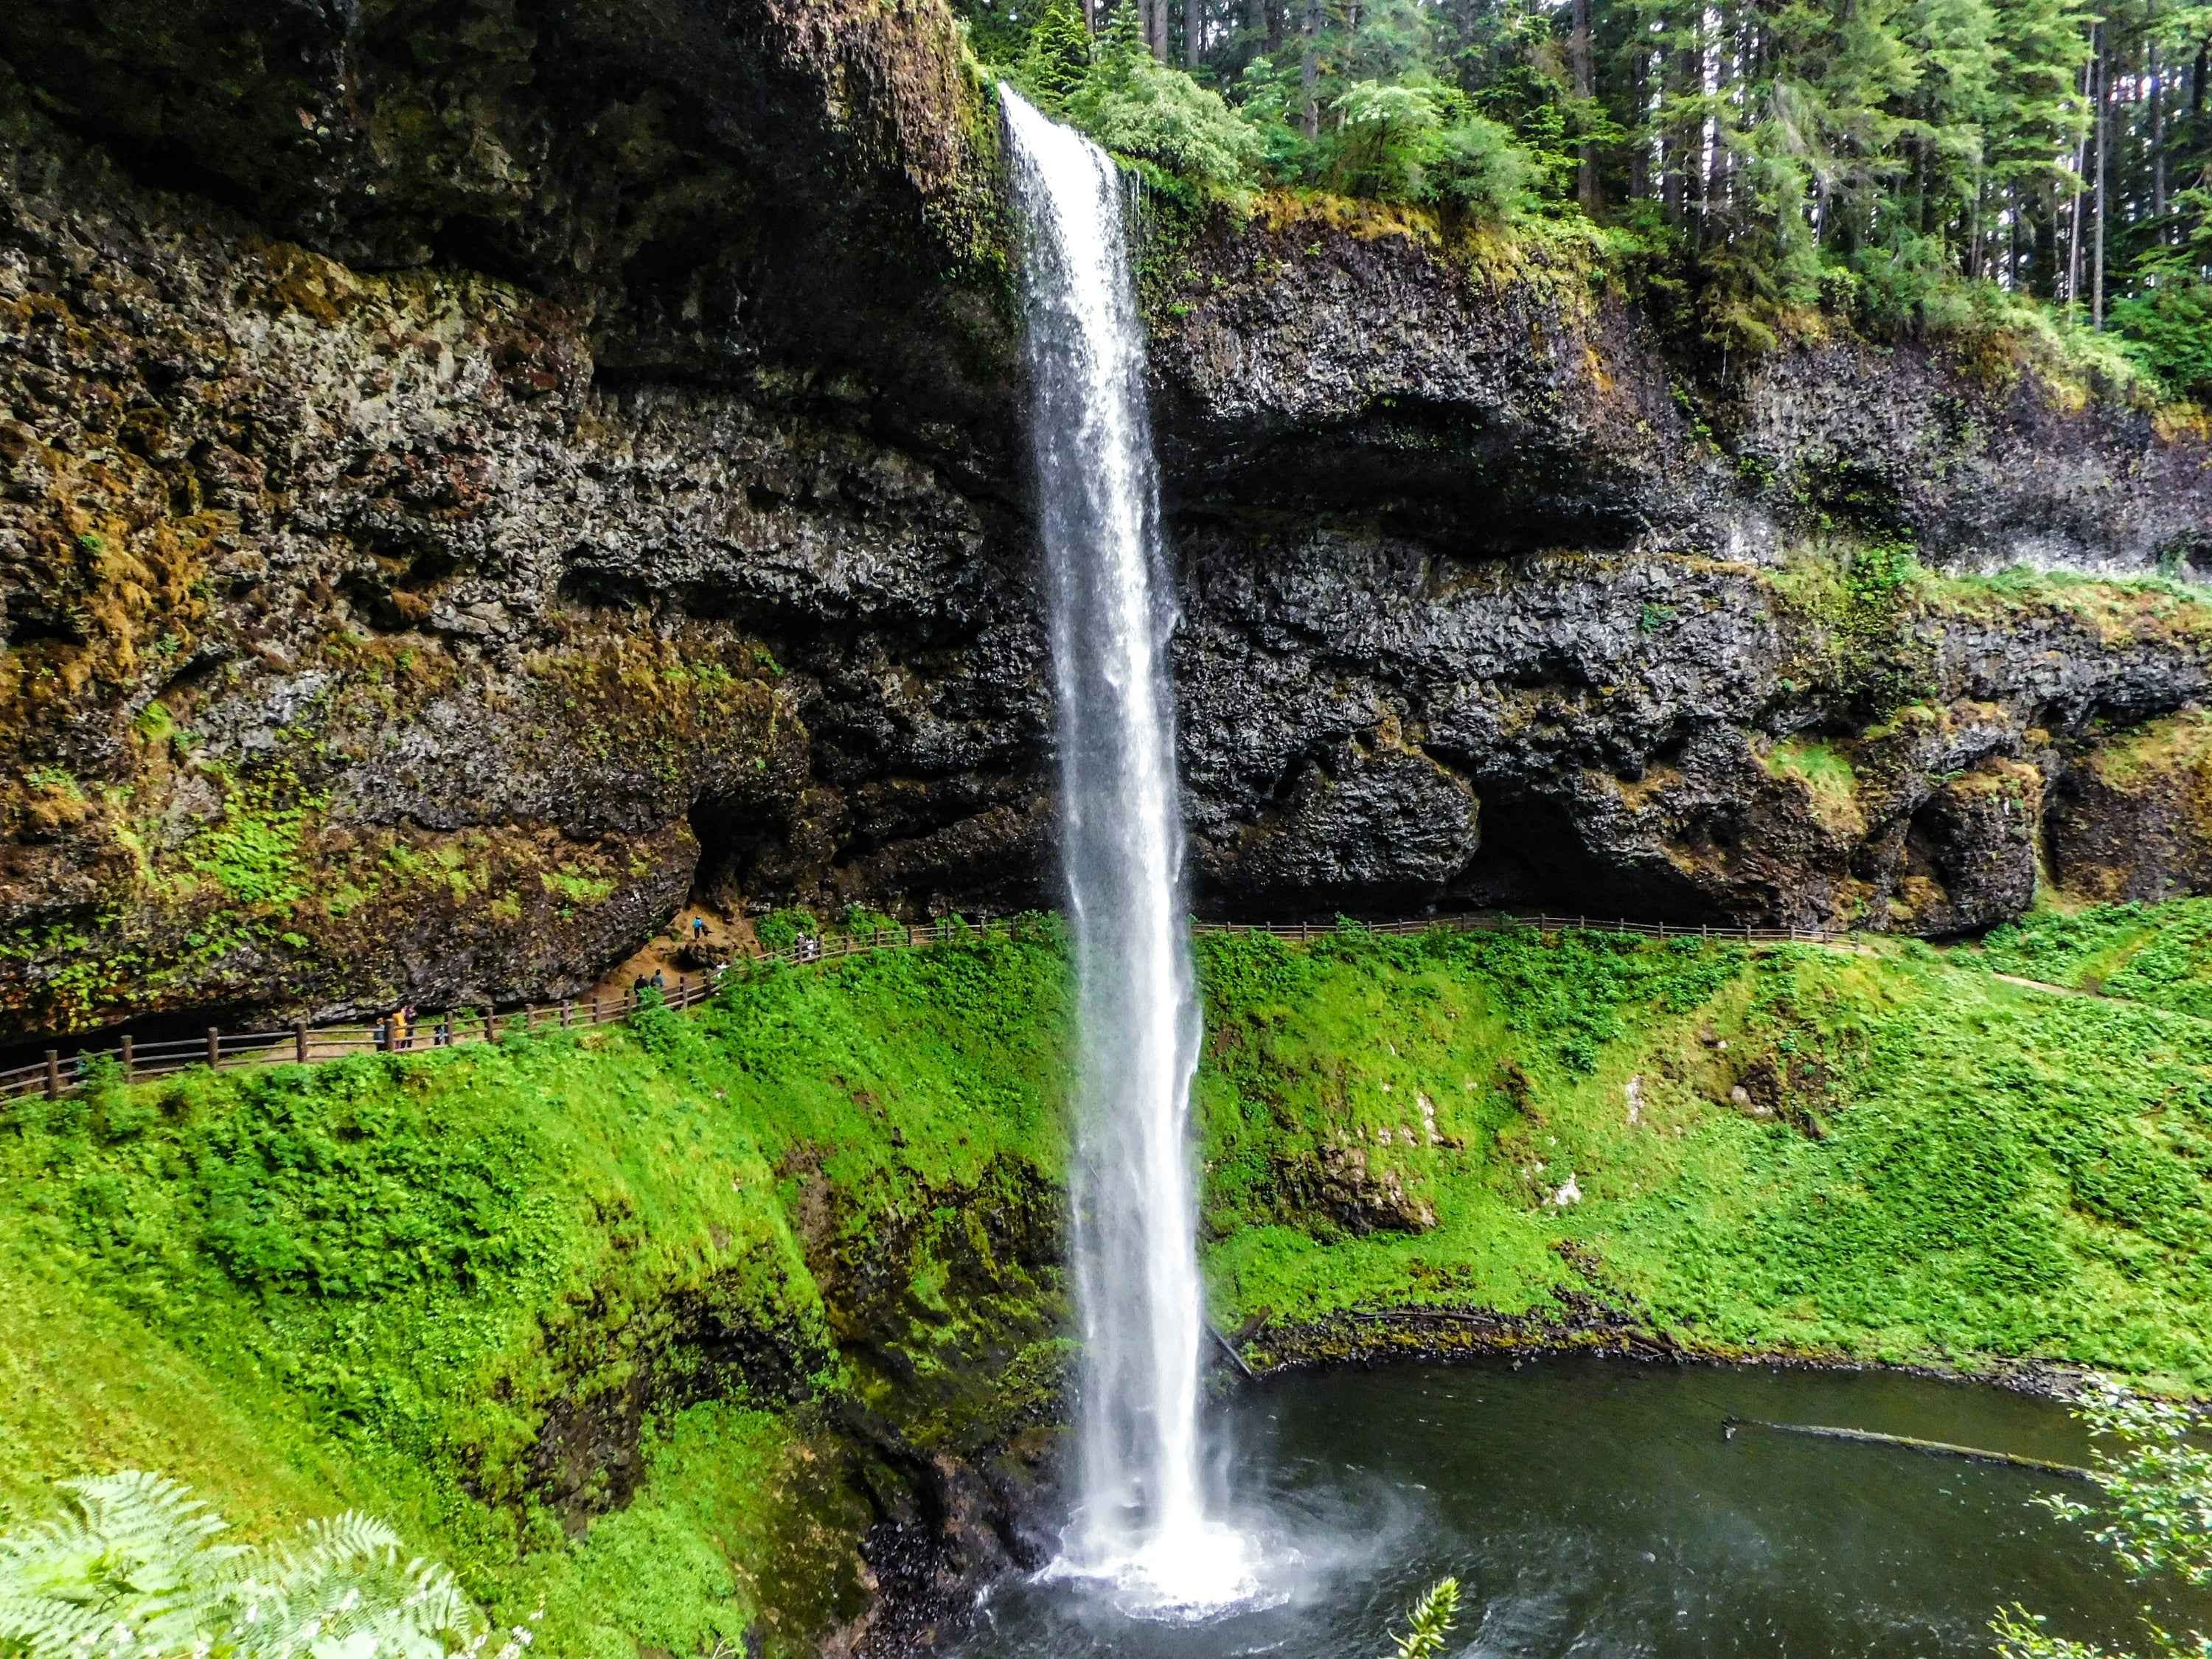 Silver Falls State Park: Things to Do, Maps, Fees, Weather & More ...